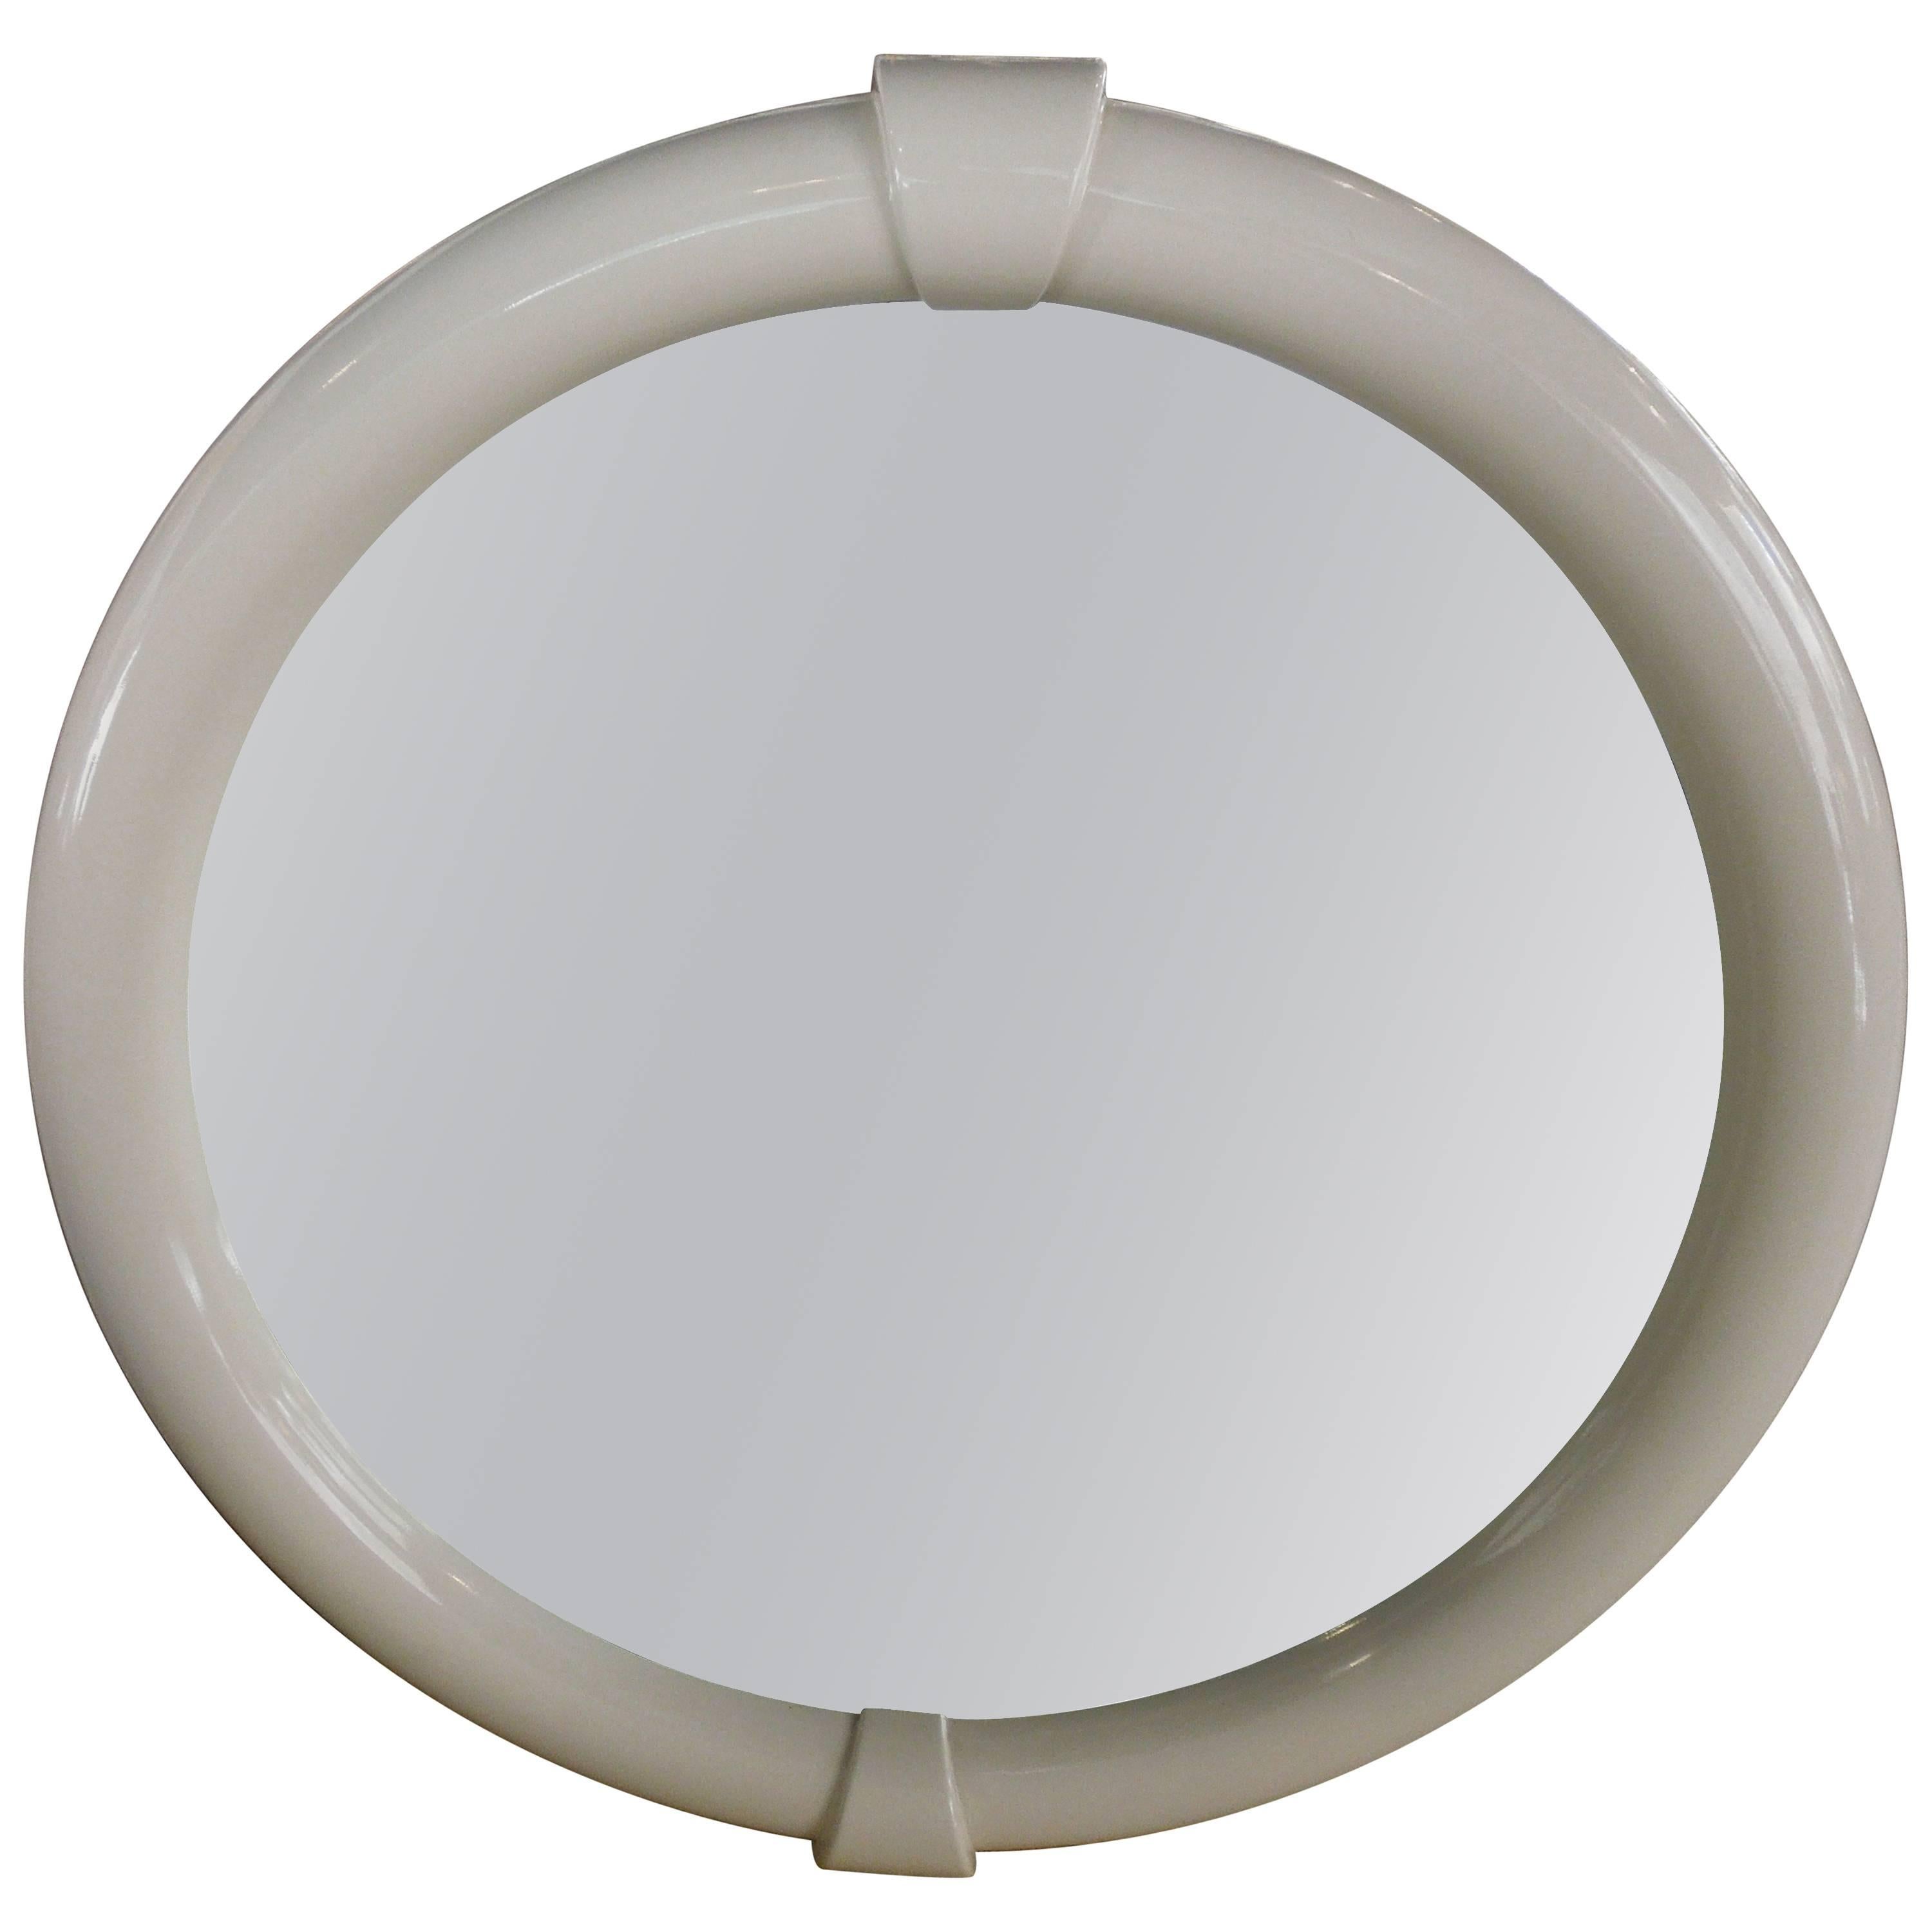 1980s Vintage Modern White Lacquer Round Mirror Made in Italy